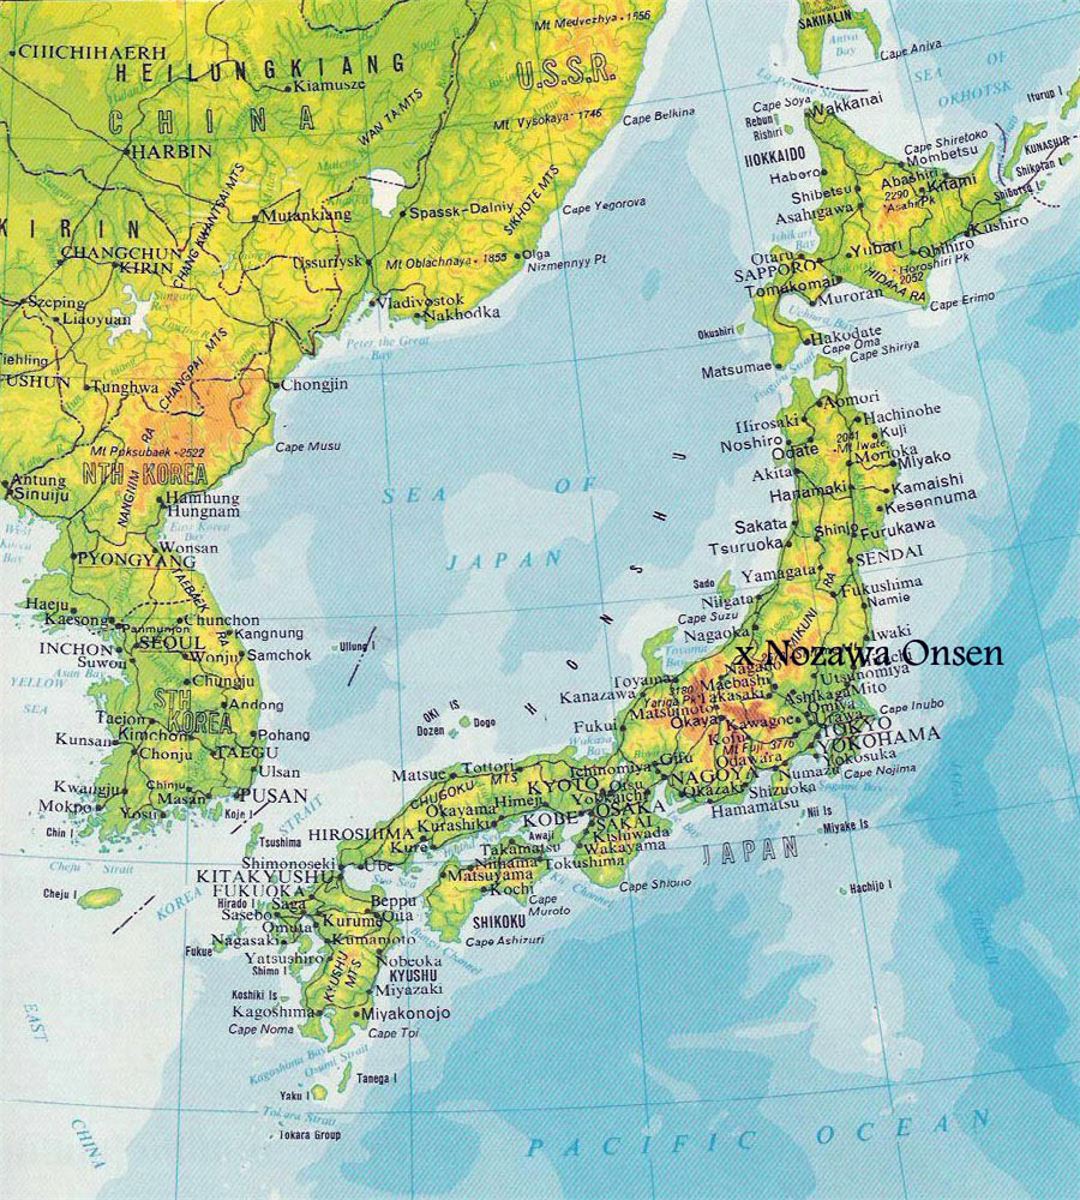 Elevation map of Japan with roads and cities